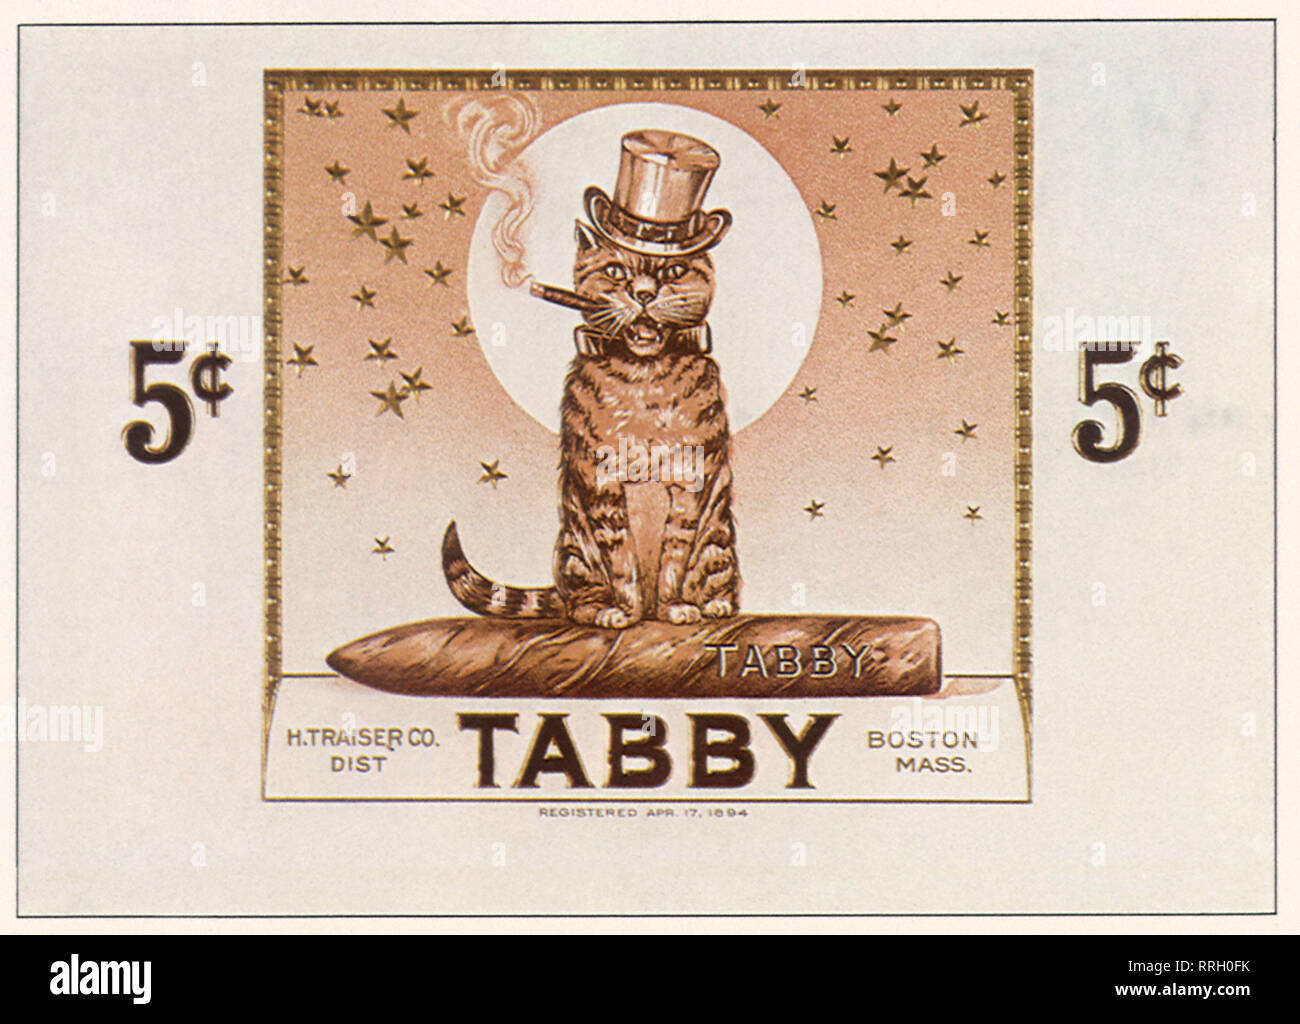 Tabby Les cigares. Banque D'Images